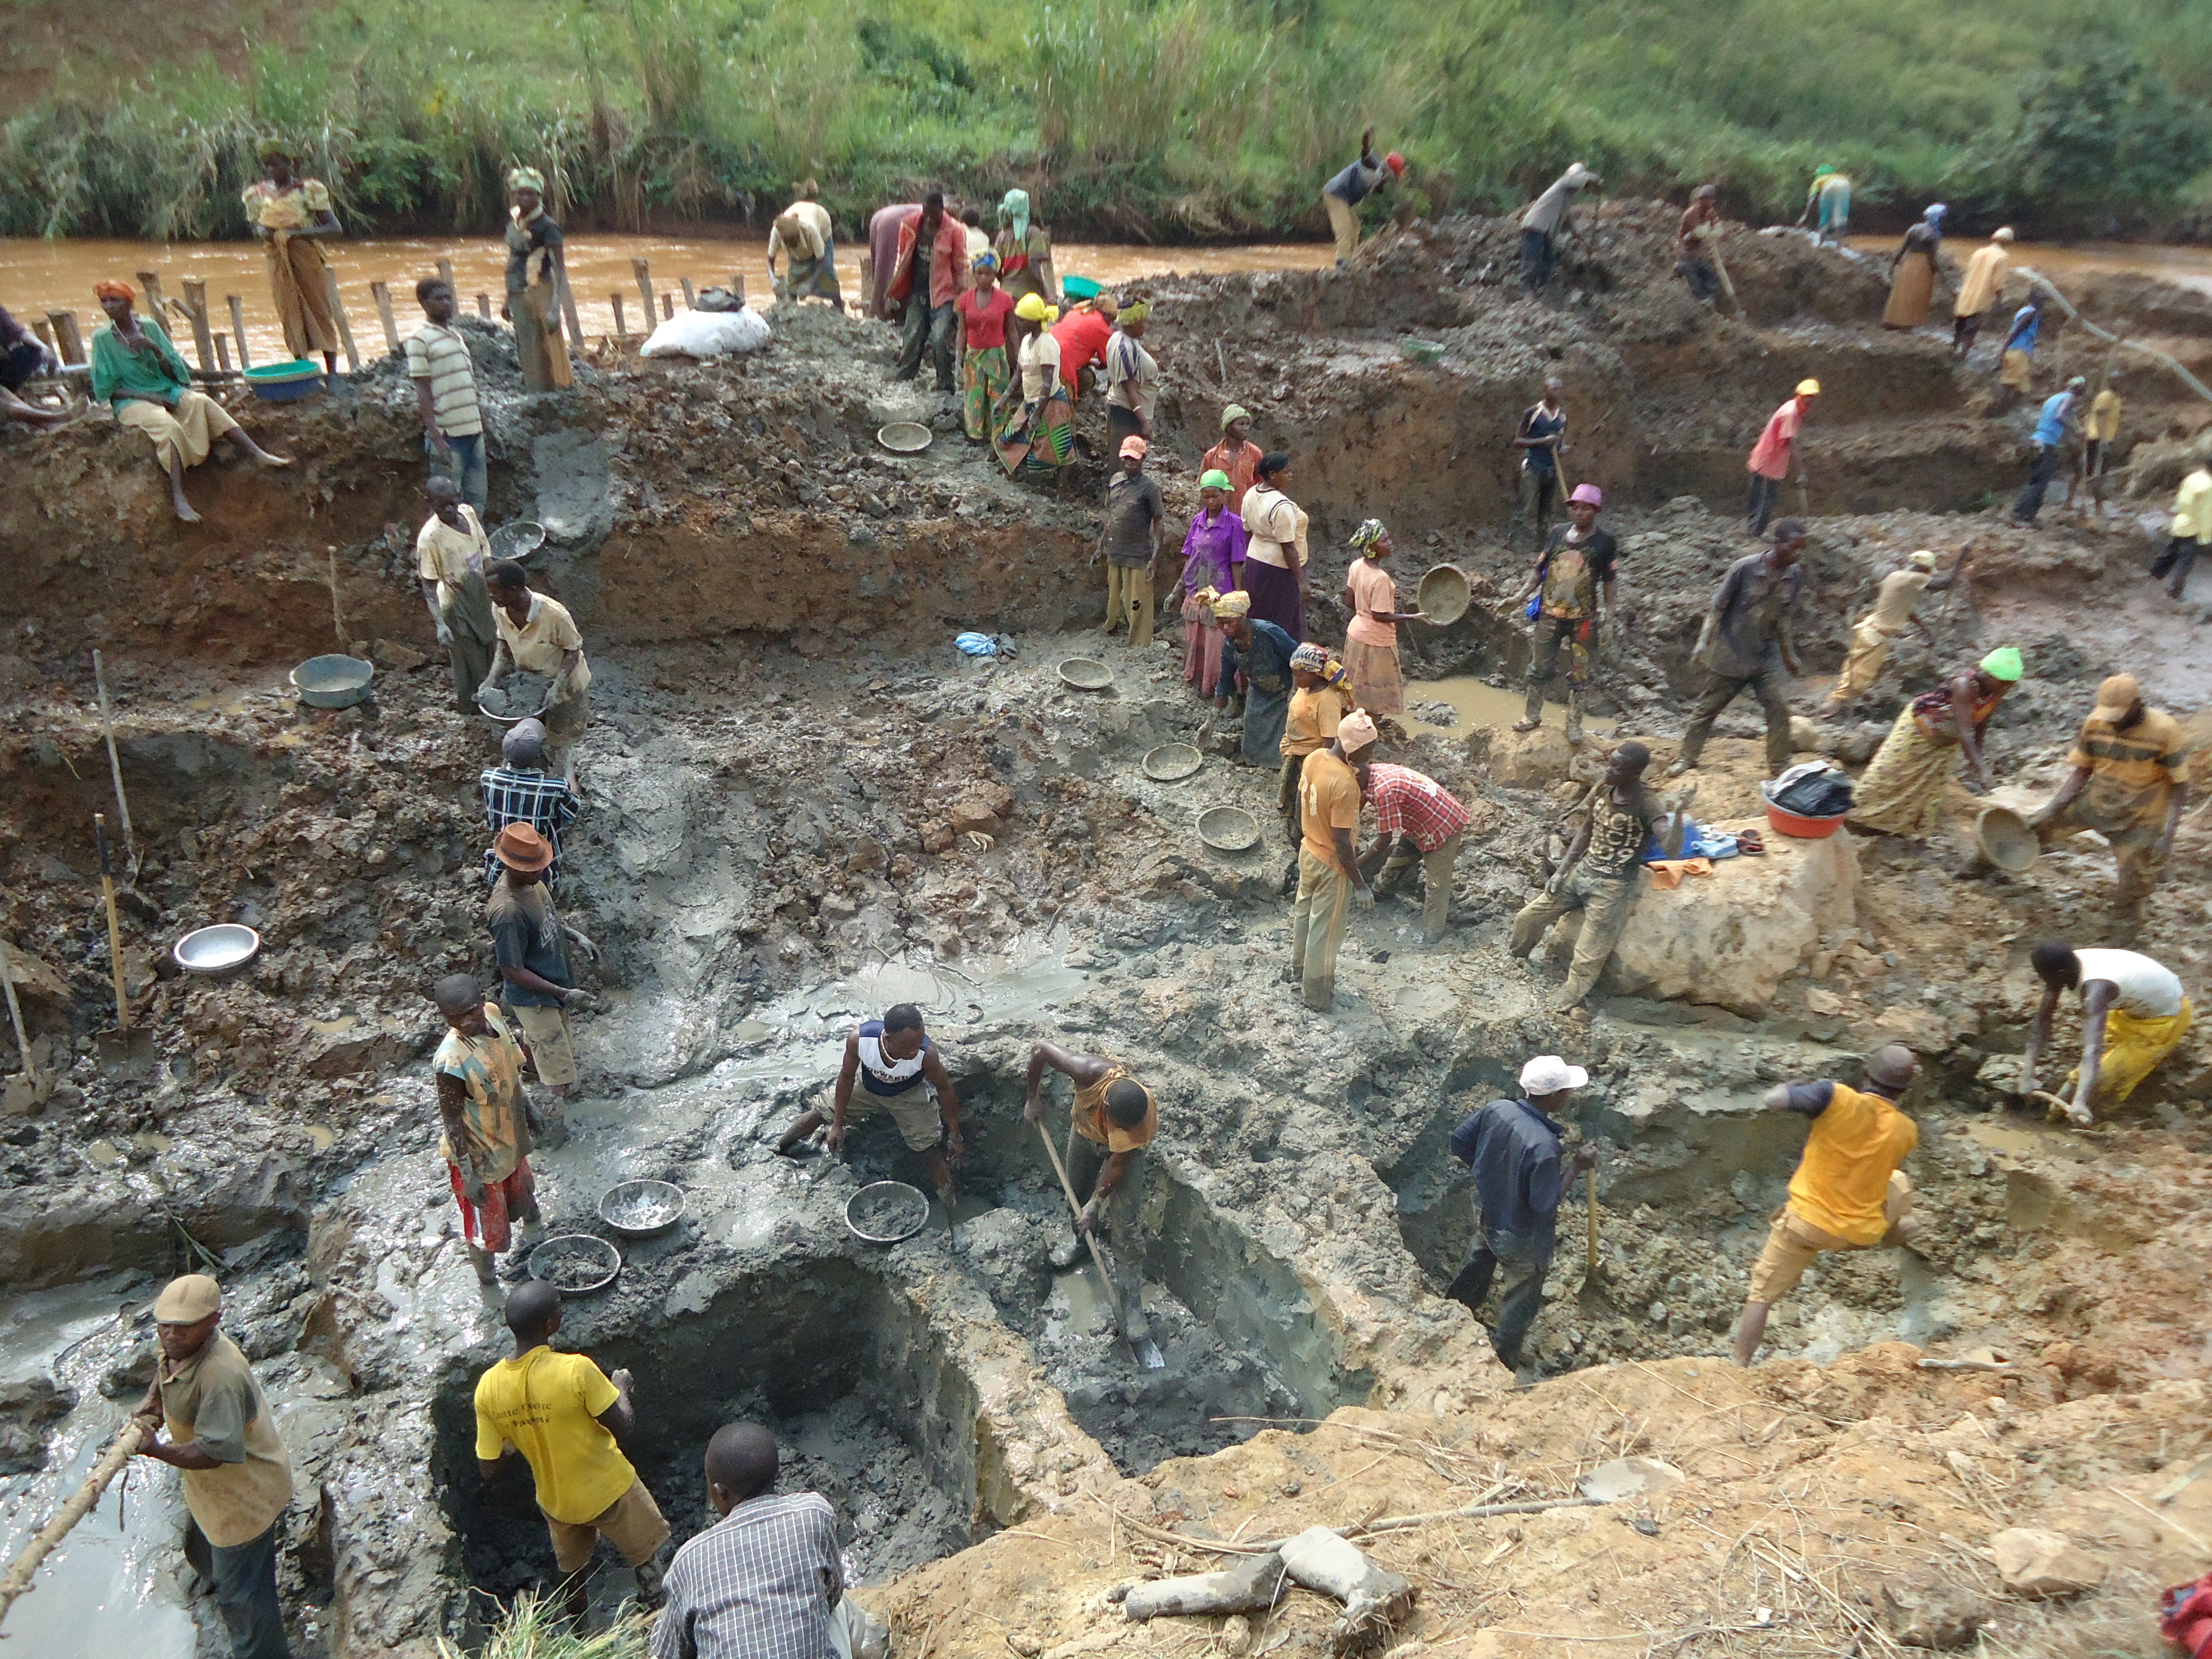 Small-scale mining next to the Nizi River.